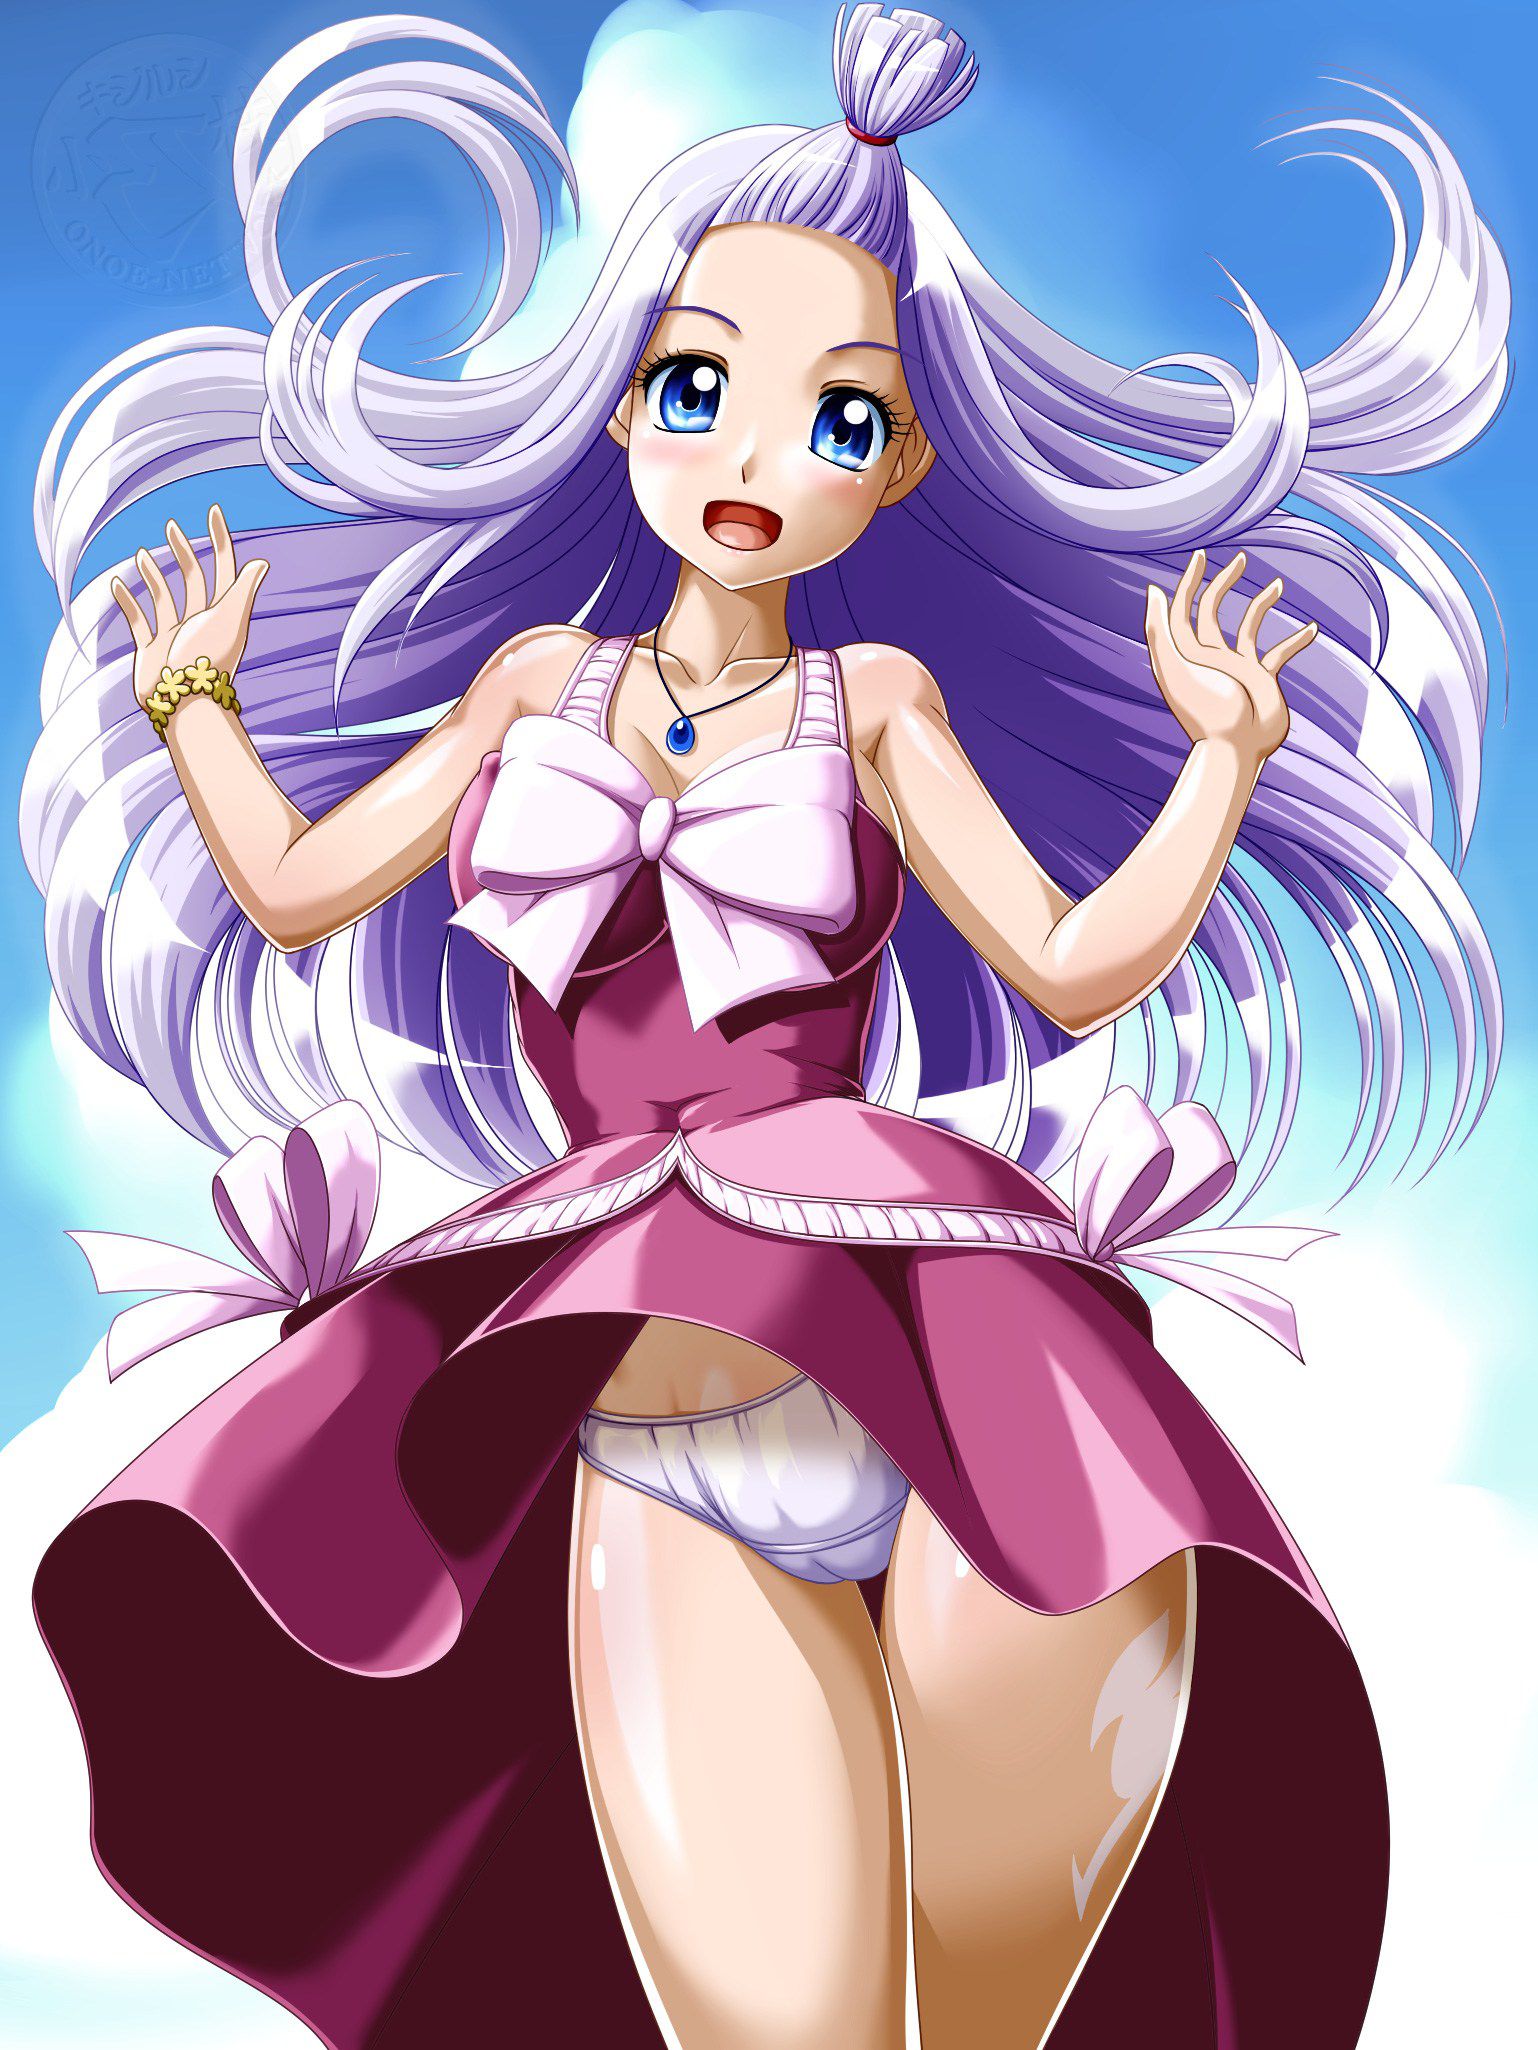 [14 pictures] fairy tail mirajane Strauss erotic pictures! 3